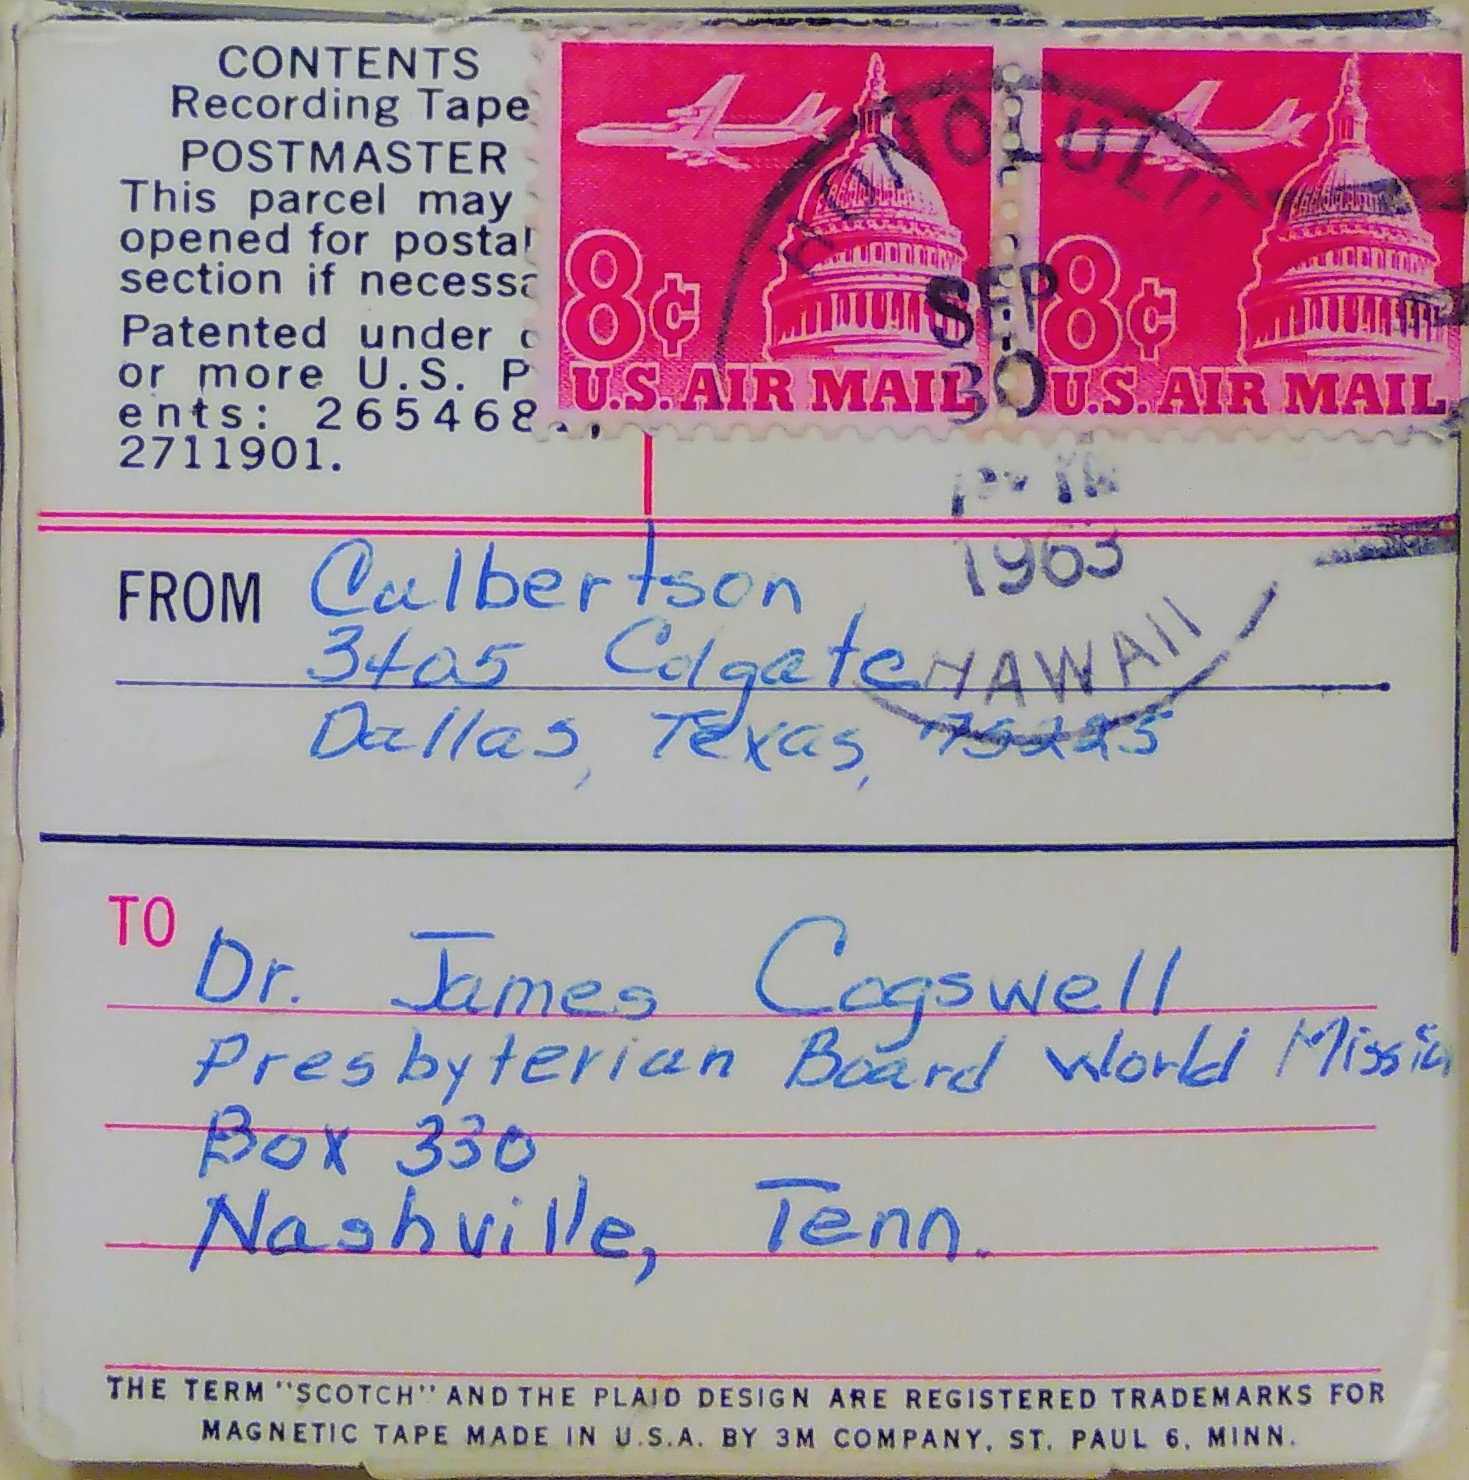 Culbertson audio letter to Cogswell, 1963, tape two, side two.